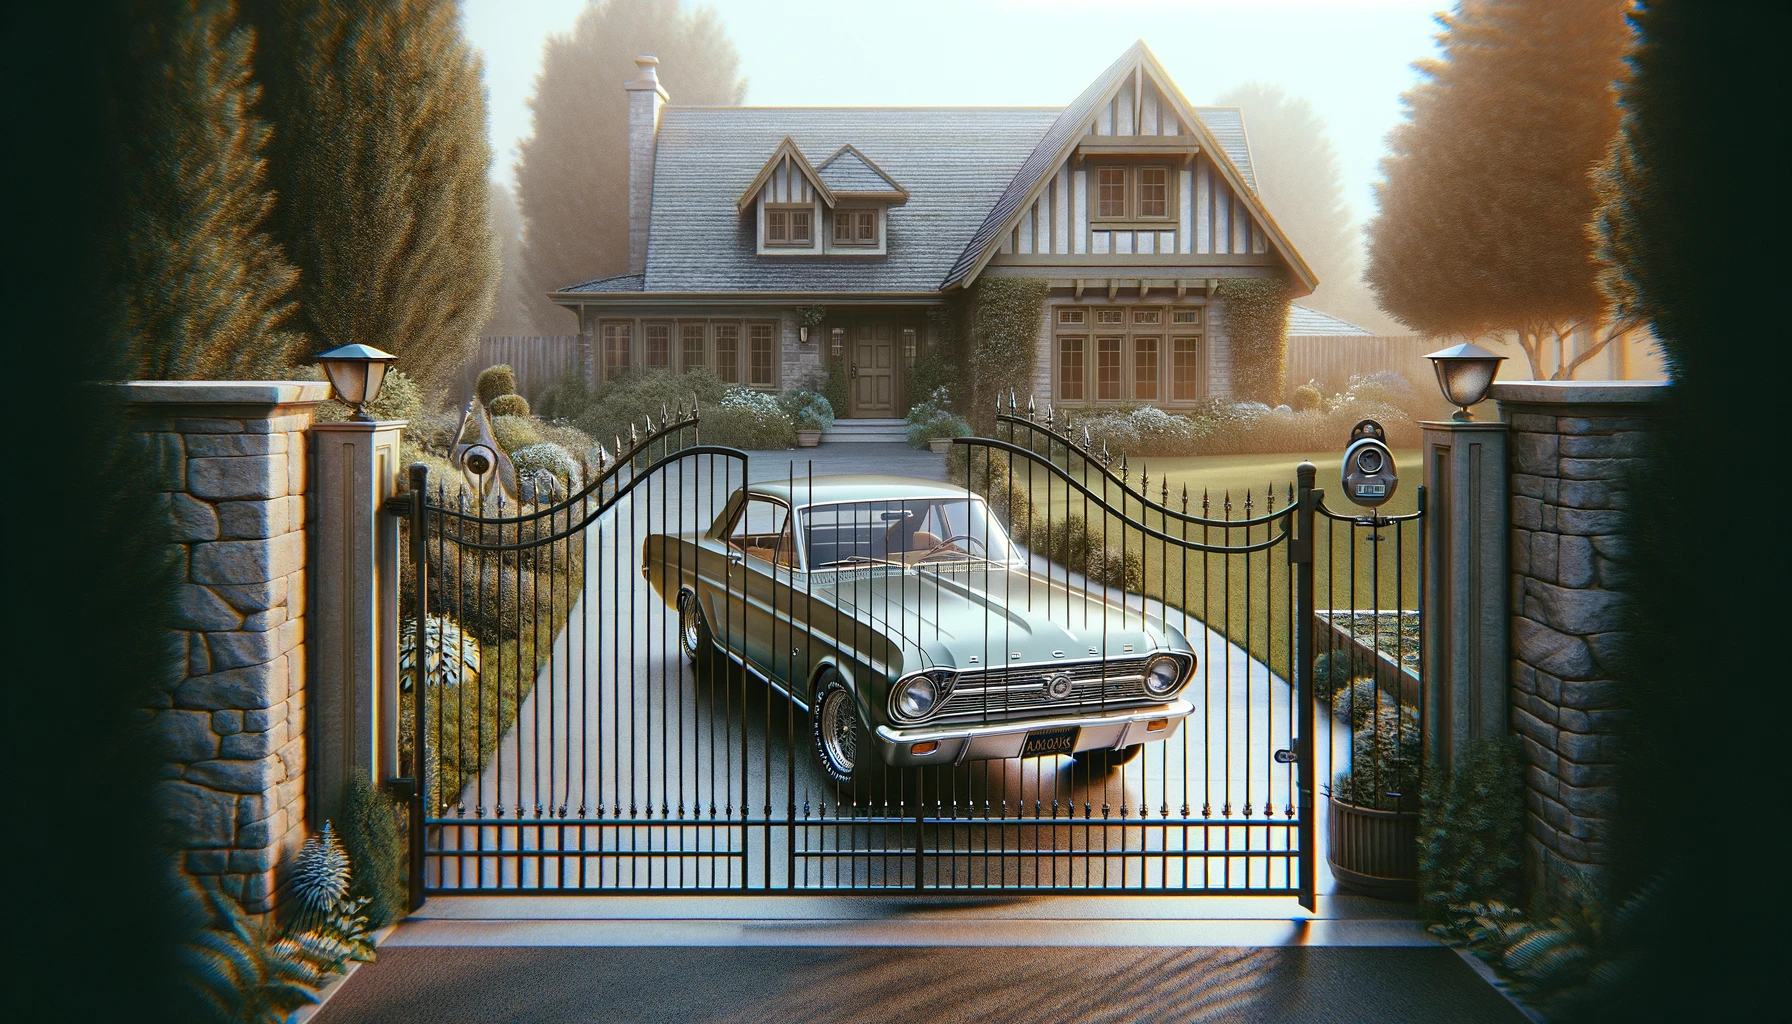 A classic car protected with a gated driveway.